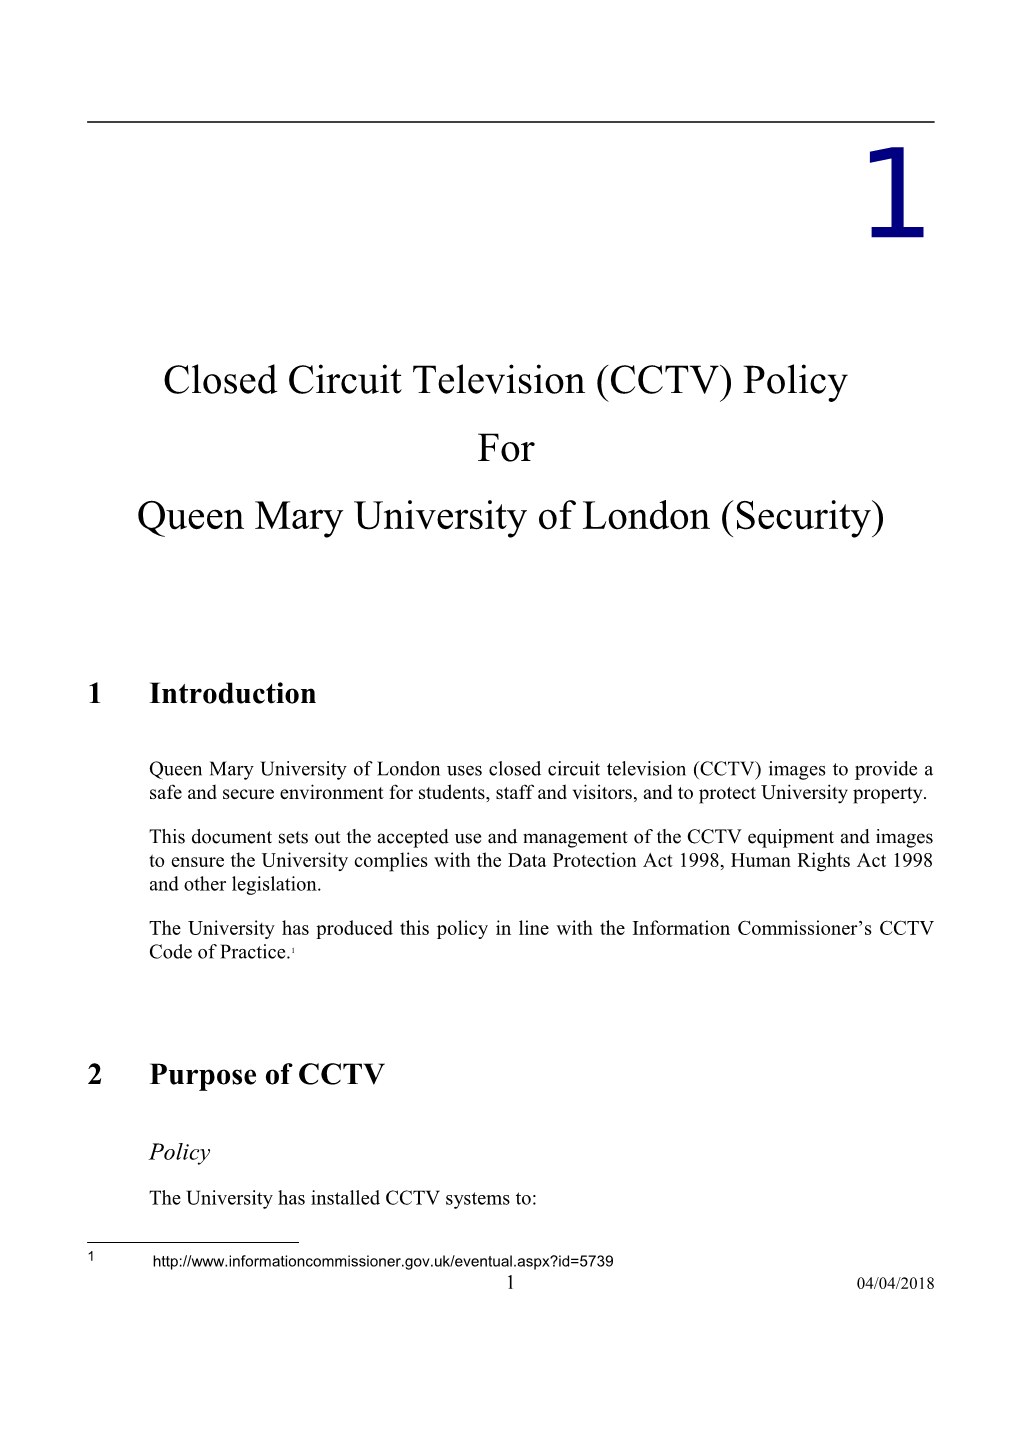 Closed Circuit Television (CCTV) Policy